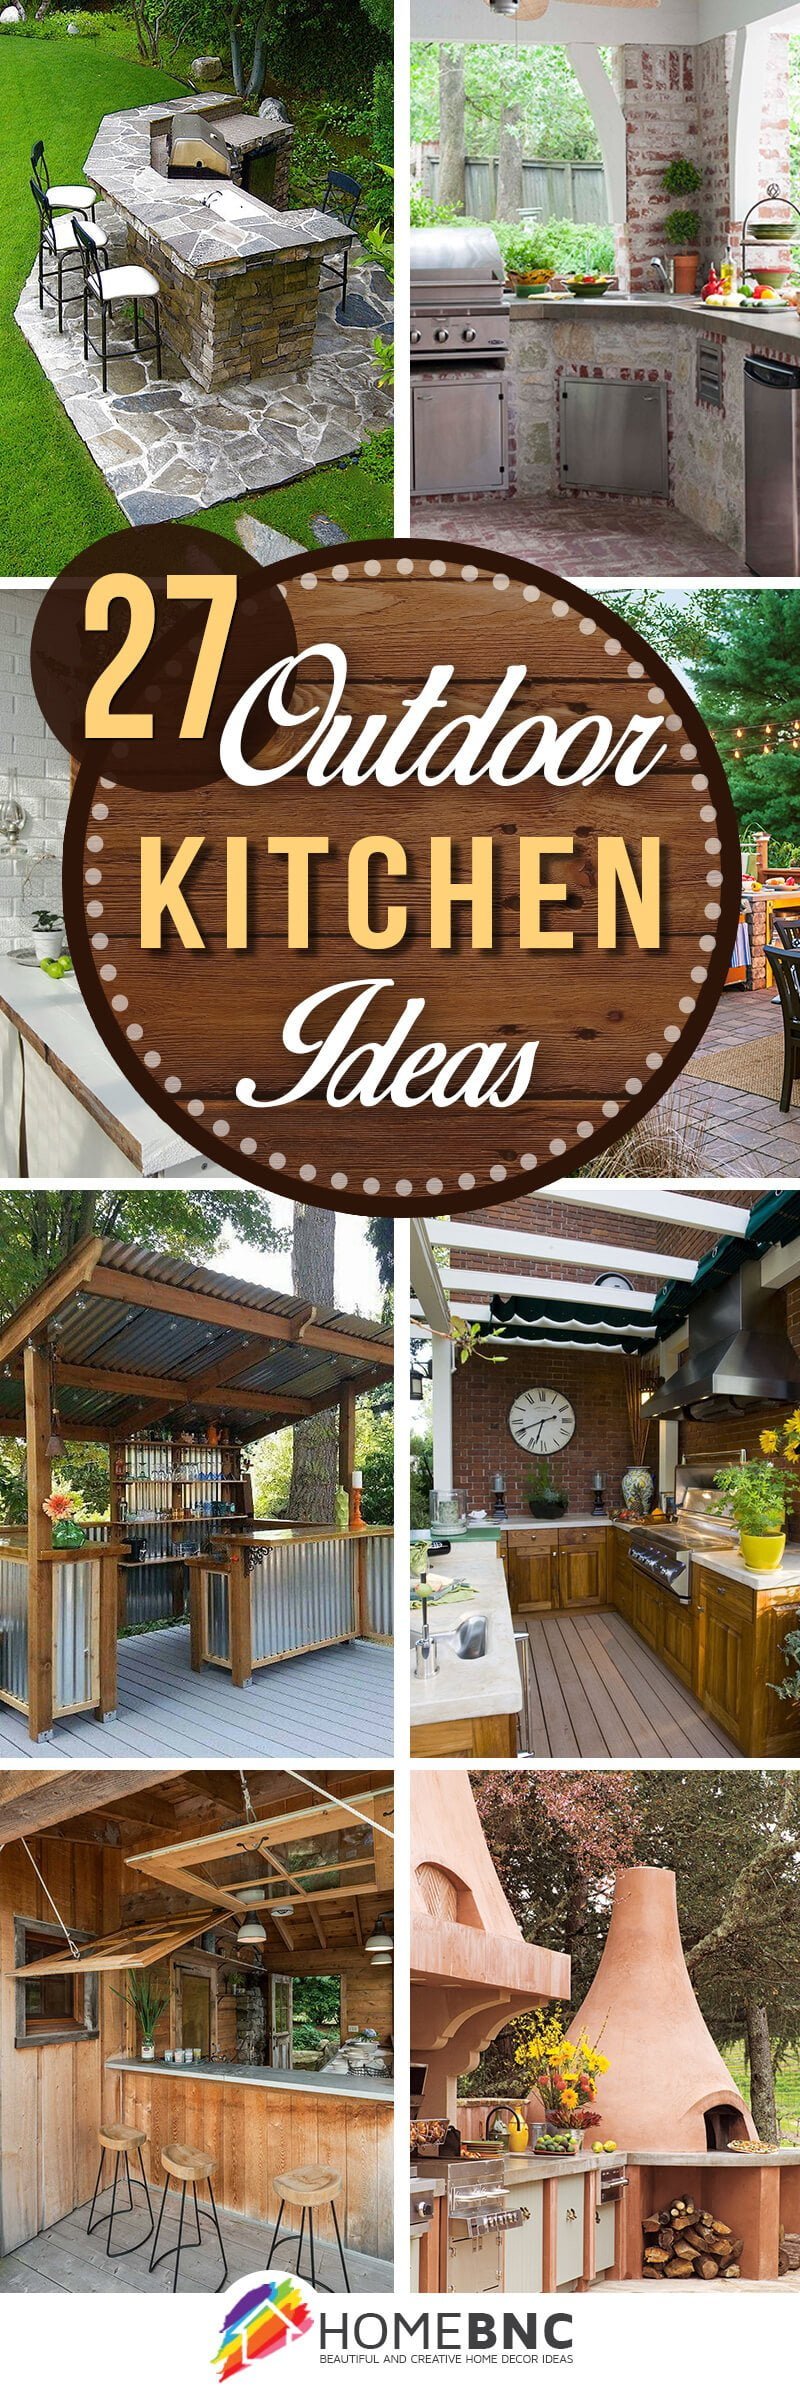 27 Best Outdoor Kitchen Ideas and Designs for 2017